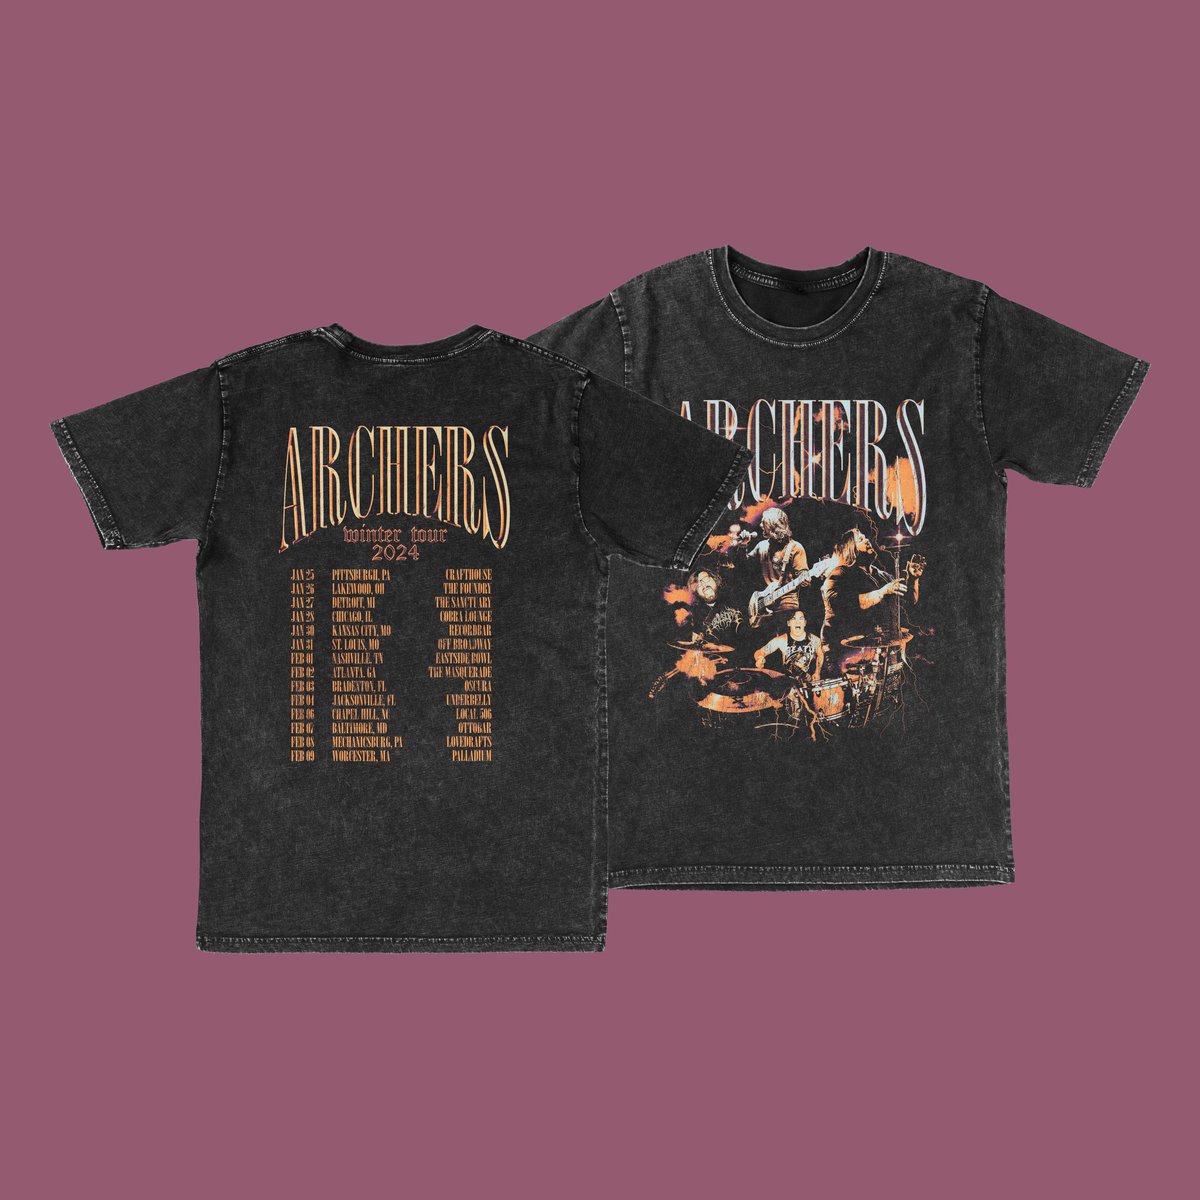 The remaining stock of tour tees from our last tour are available on our store until they’re gone! archersmerch.com